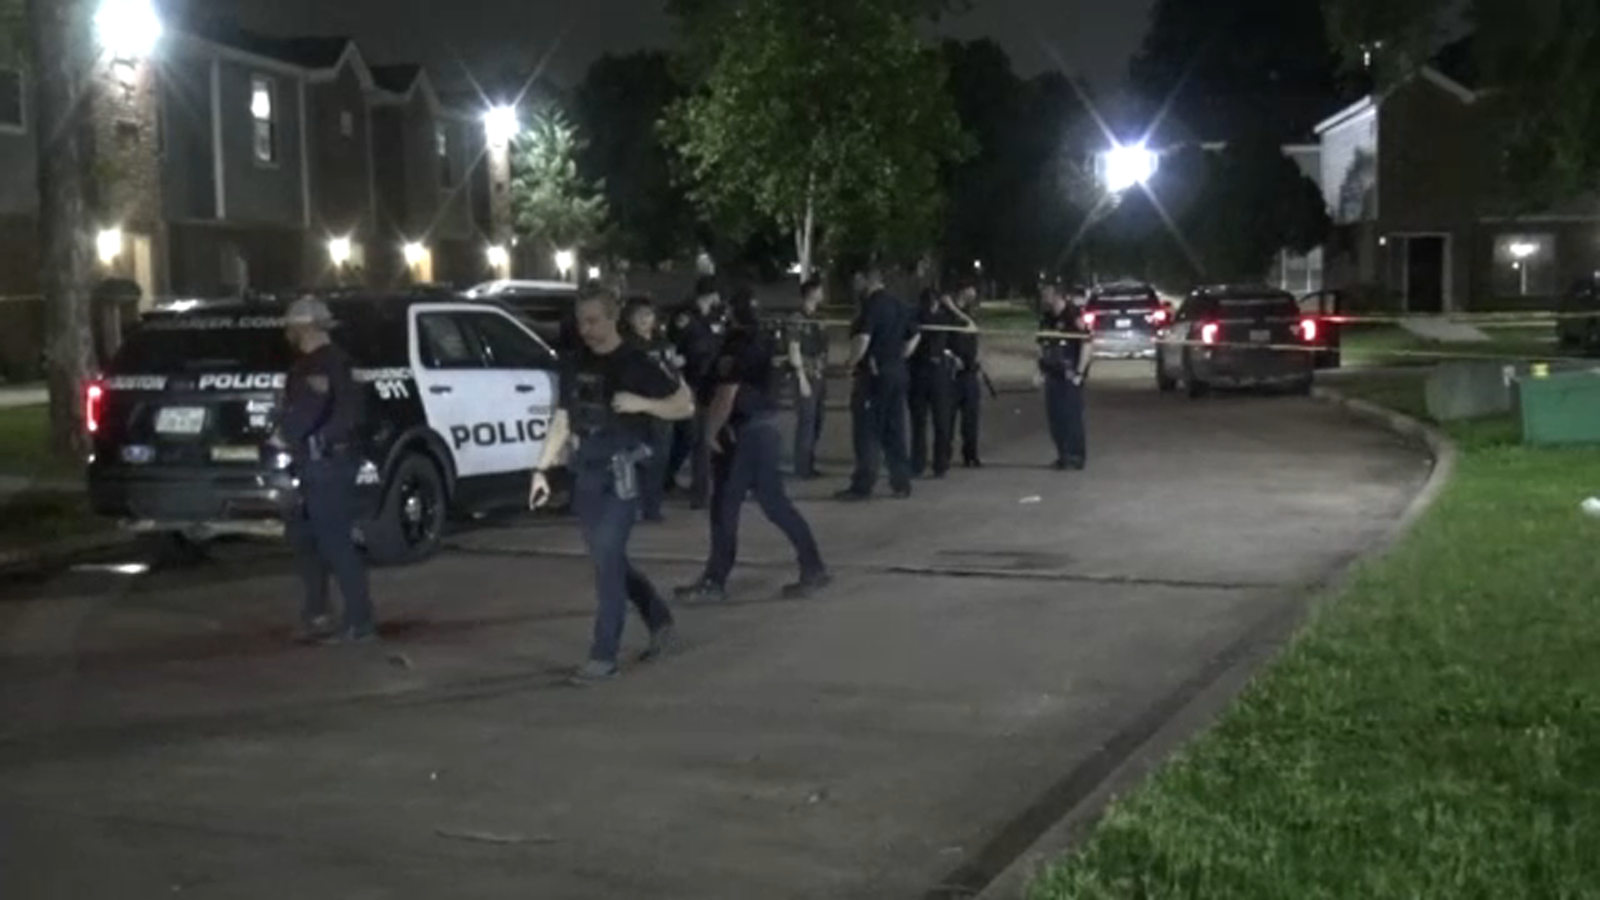 Pizza delivery driver detained after shooting resident during argument at Yellowstone apartment in Houston’s south side: HPD [Video]